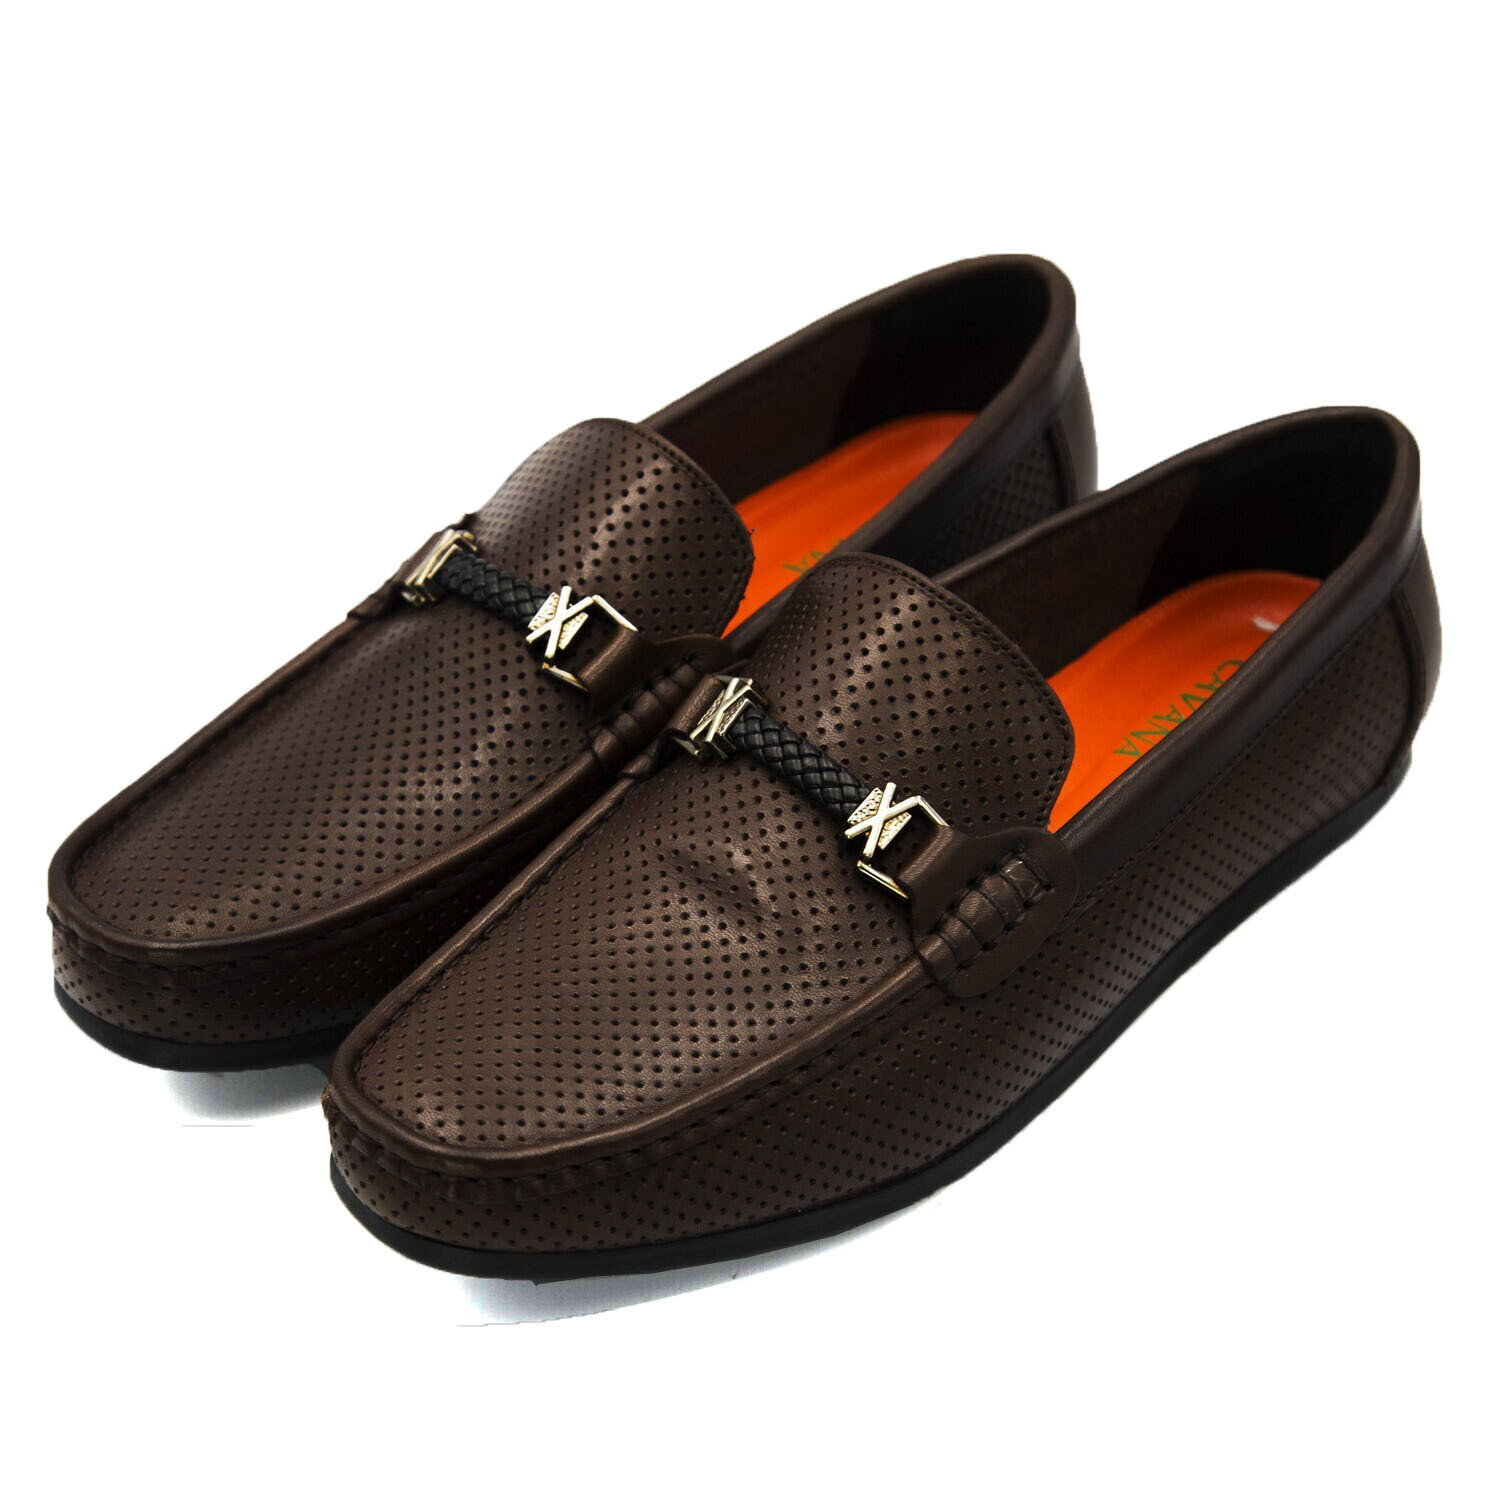 100% pure leather moccasin for men